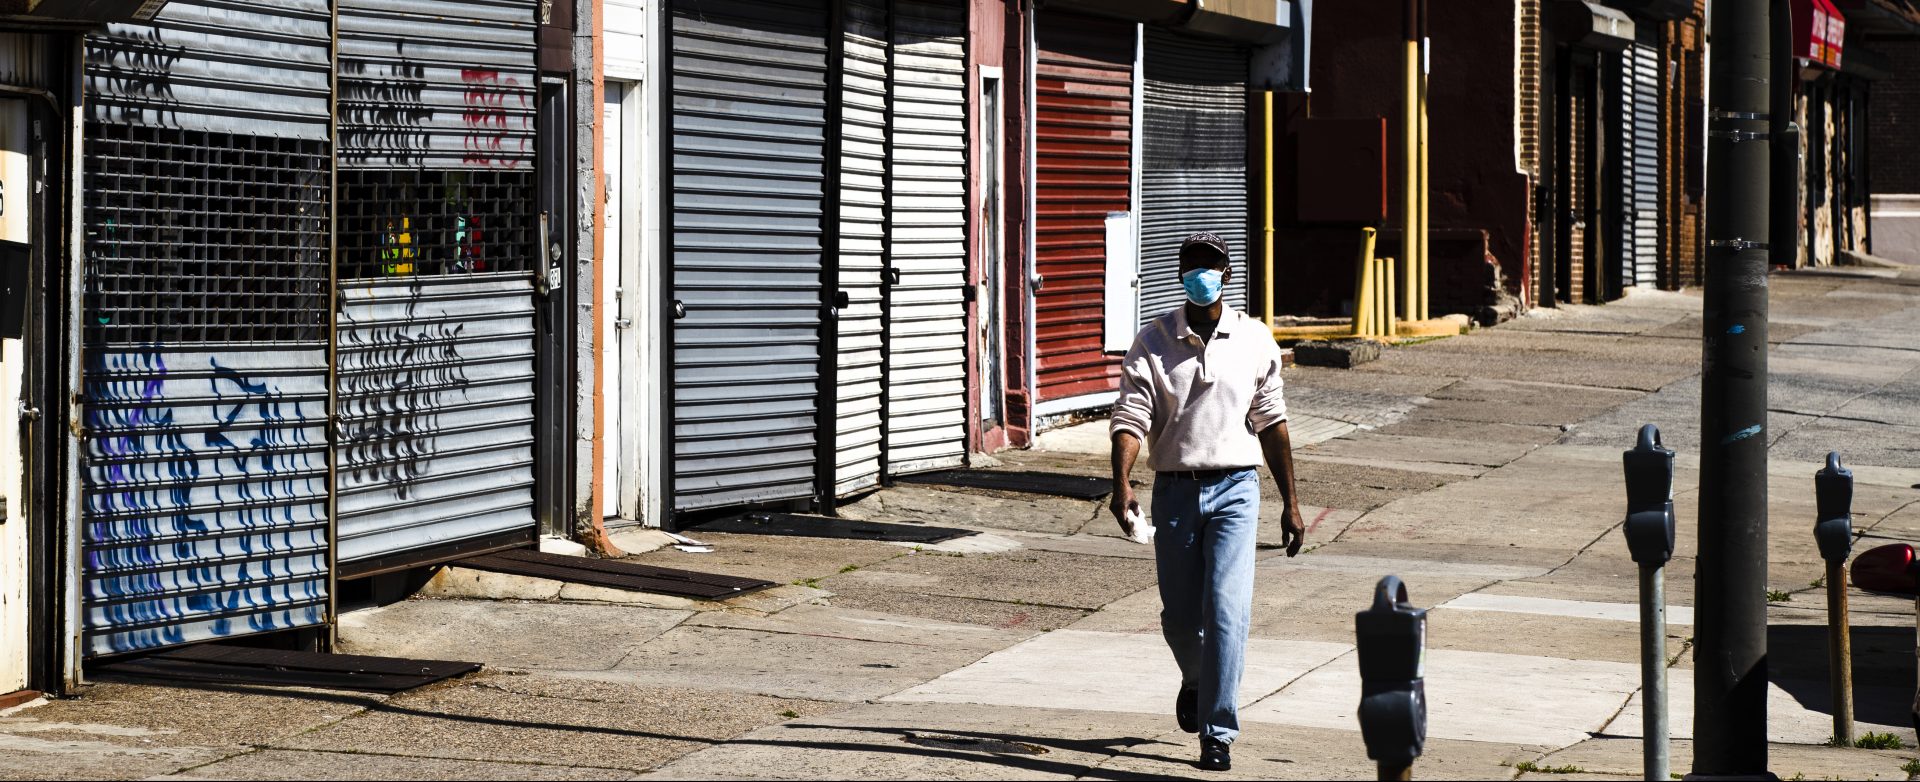 A person wearing a protective face mask as a precaution against the coronavirus walks past stuttered businesses in Philadelphia, Thursday, May 7, 2020.